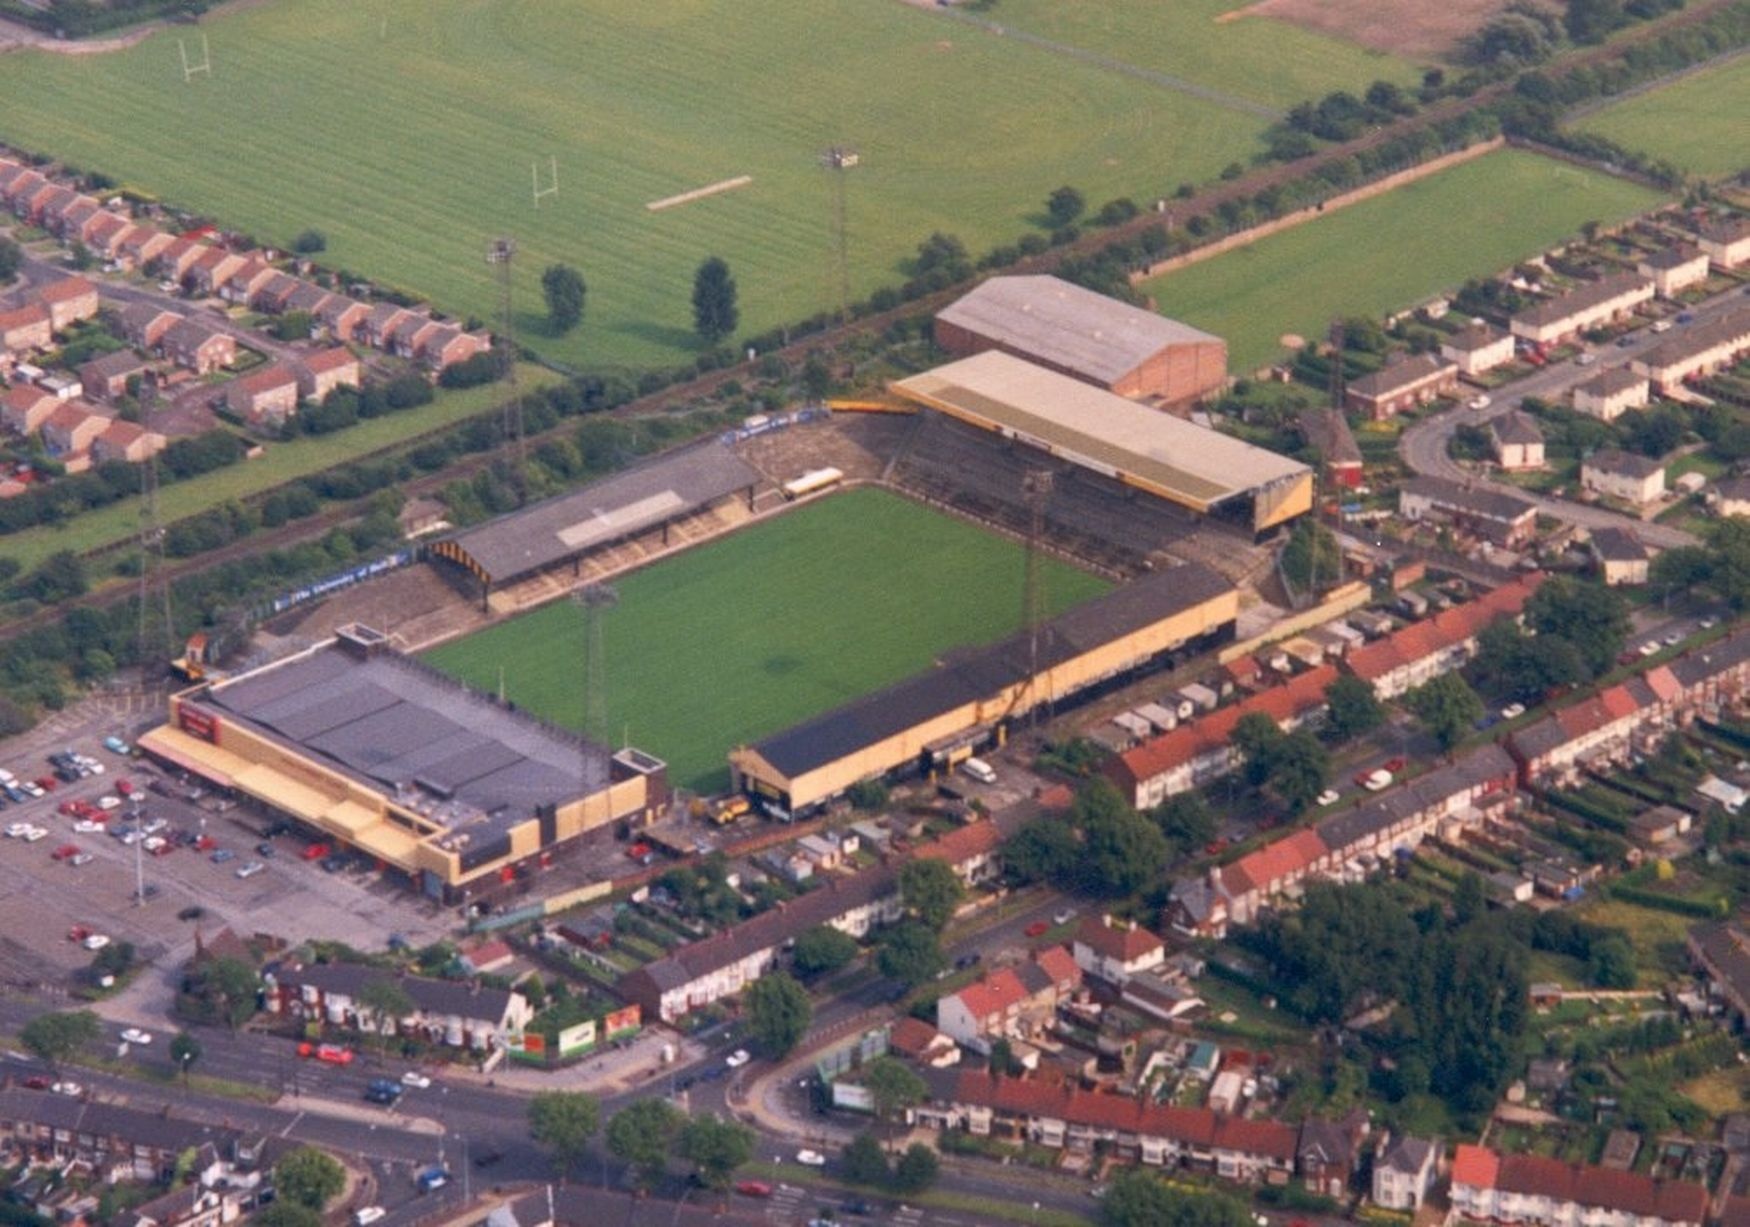 Boothferry Park